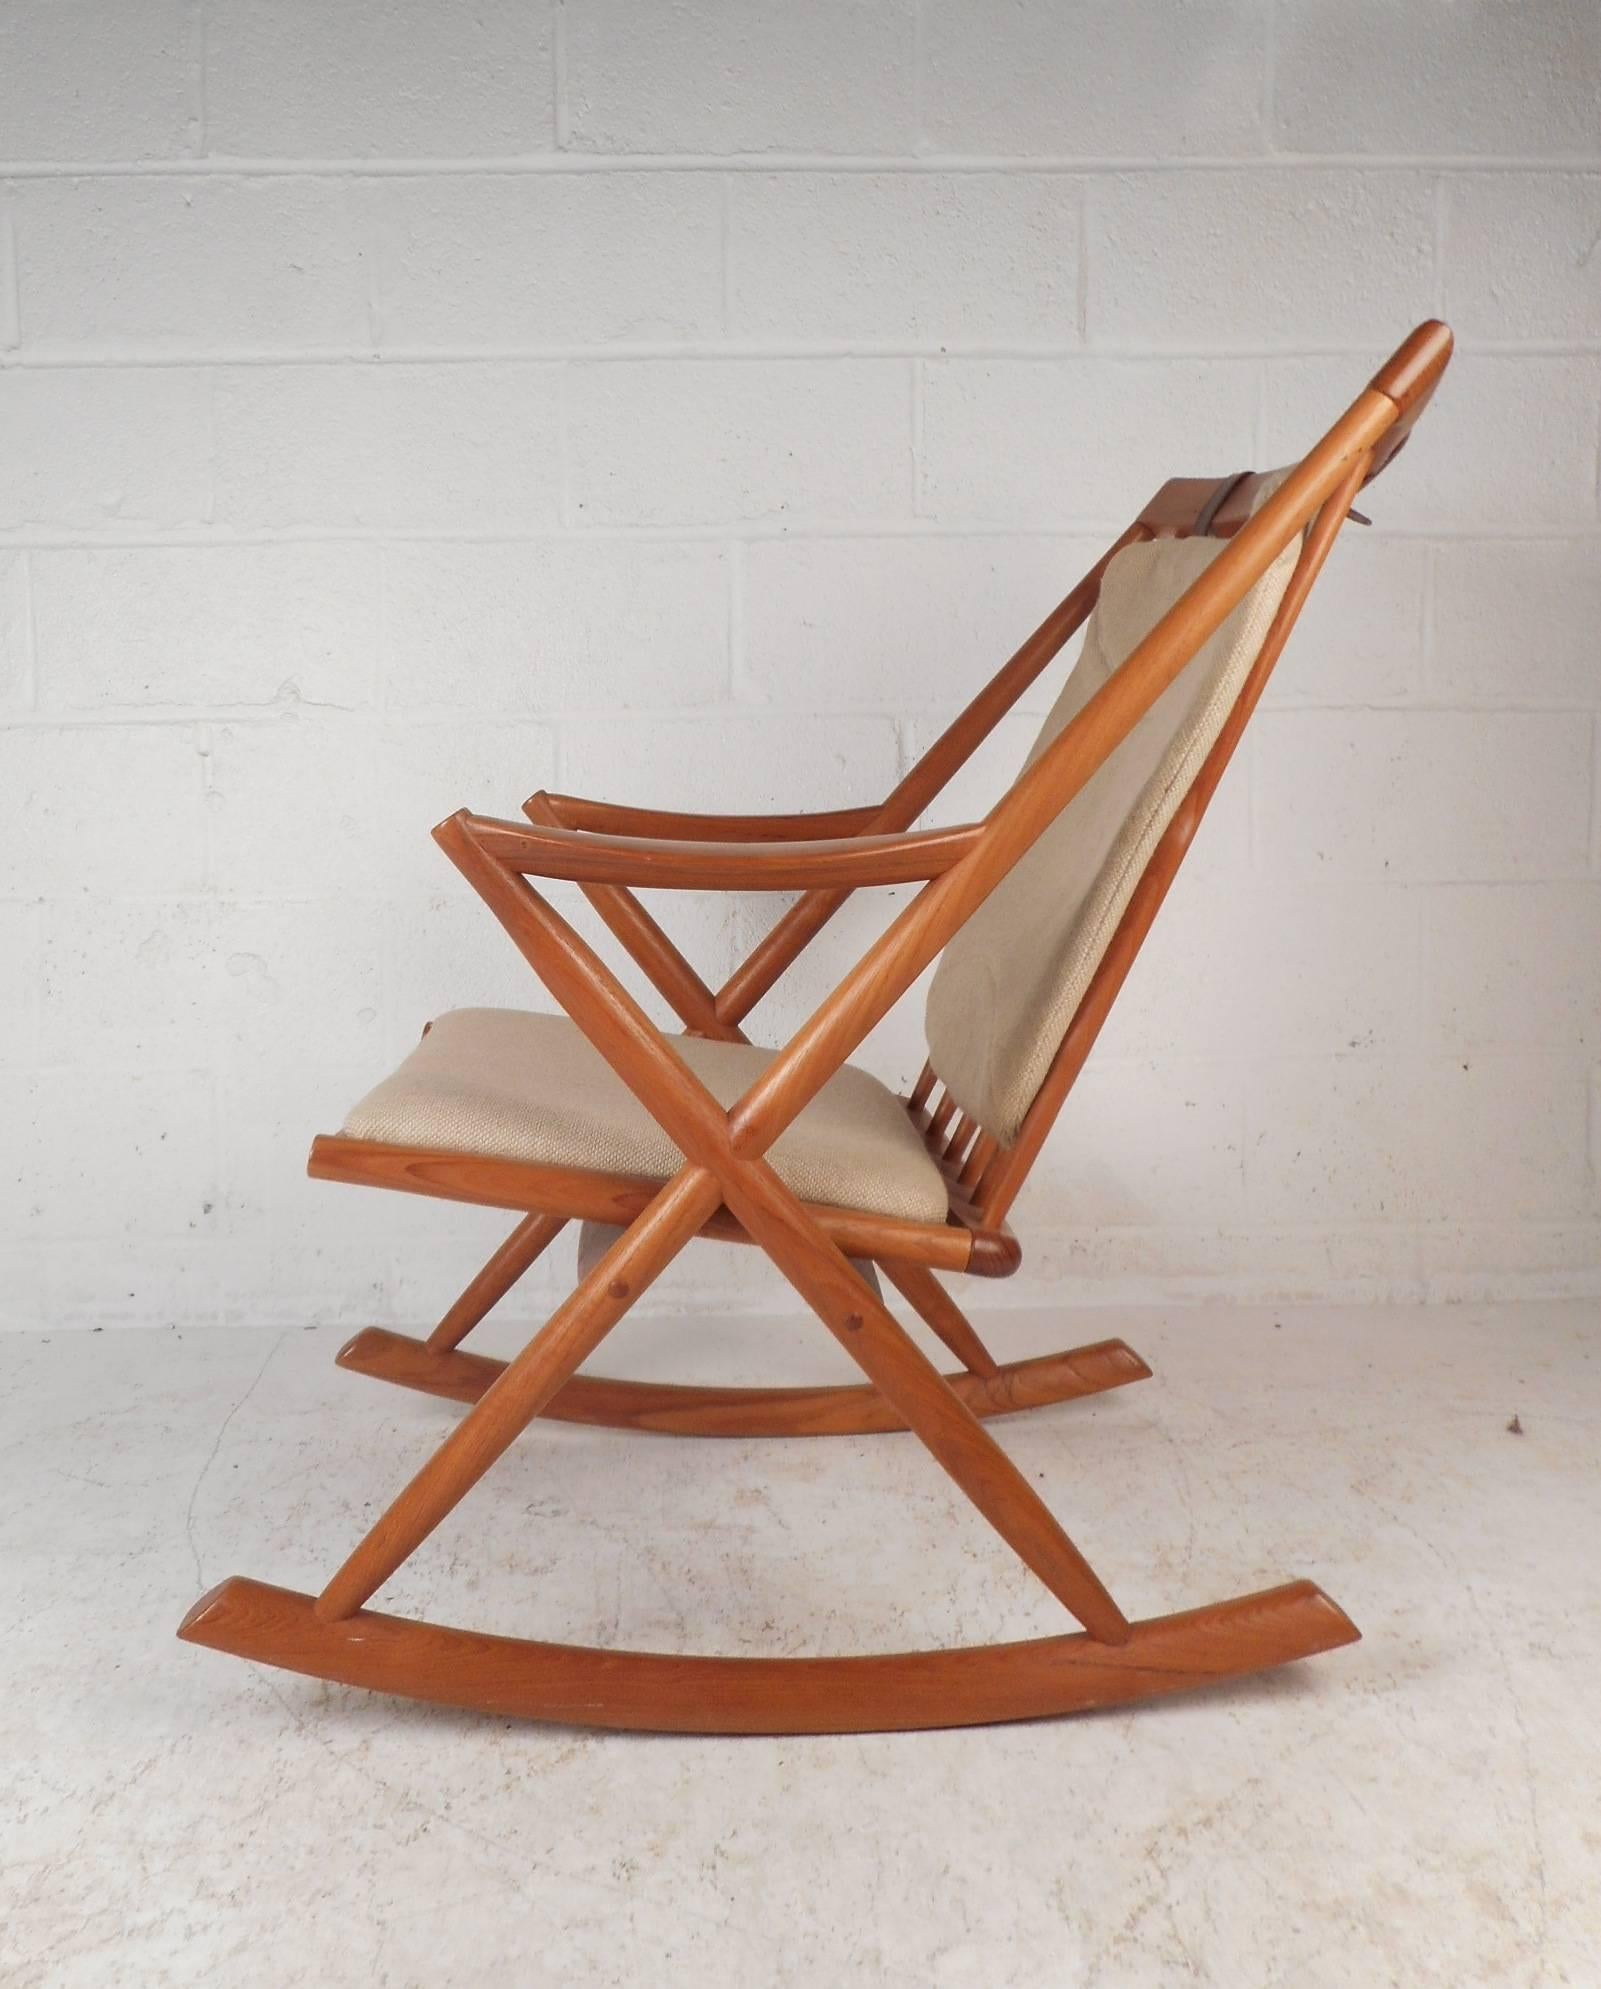 This beautiful vintage modern rocking chair features a solid teak frame with unique “X” shaped sides. Exquisite seating with a thick padded cushion and a cushion attached to the backrest with leather straps holding it in place. This comfortable